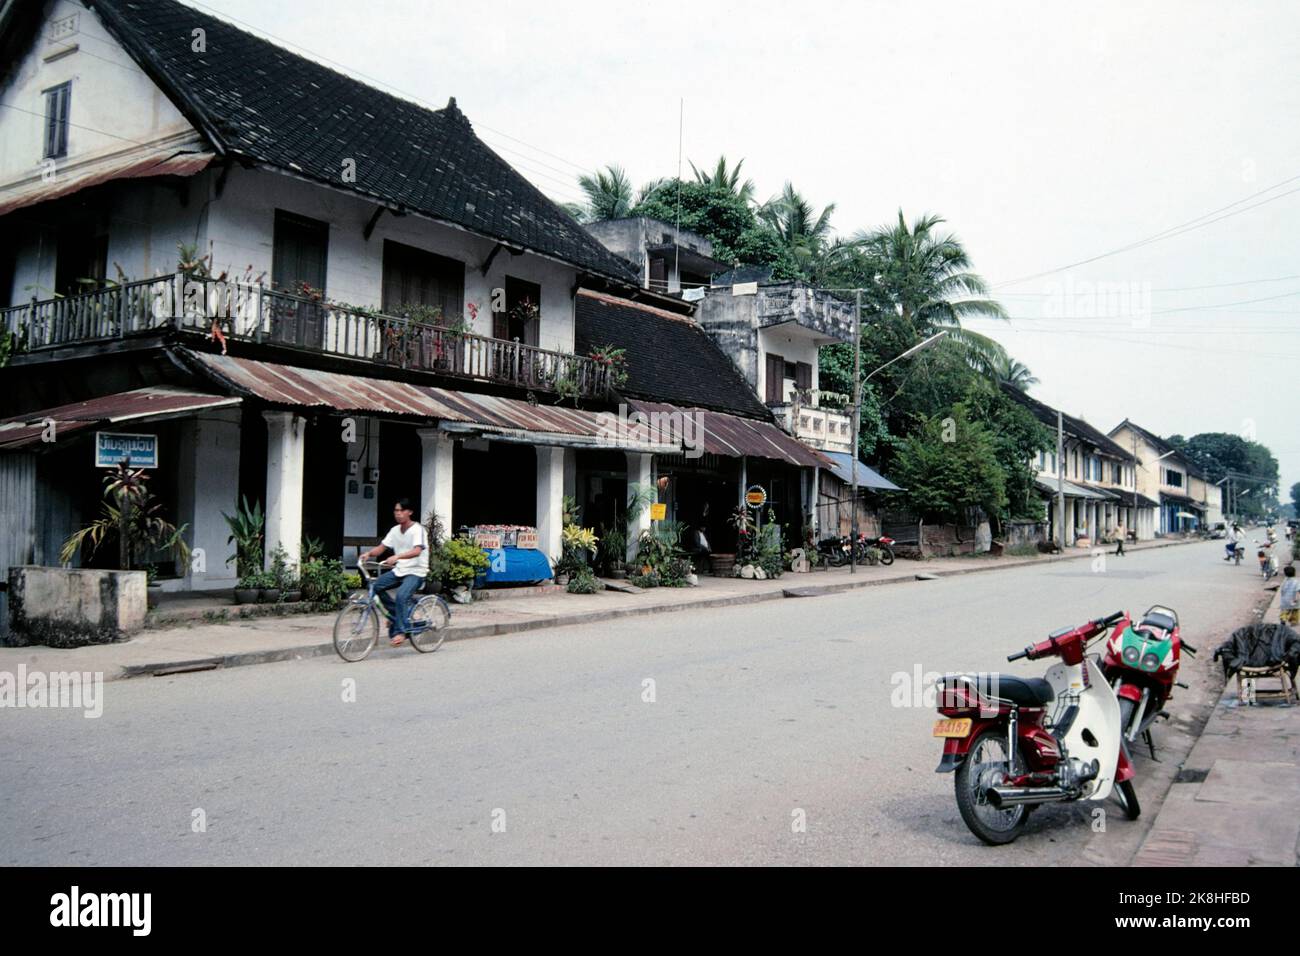 Street view, French Colonial-style buildings in Luang Prabang, Laos 1997 Stock Photo